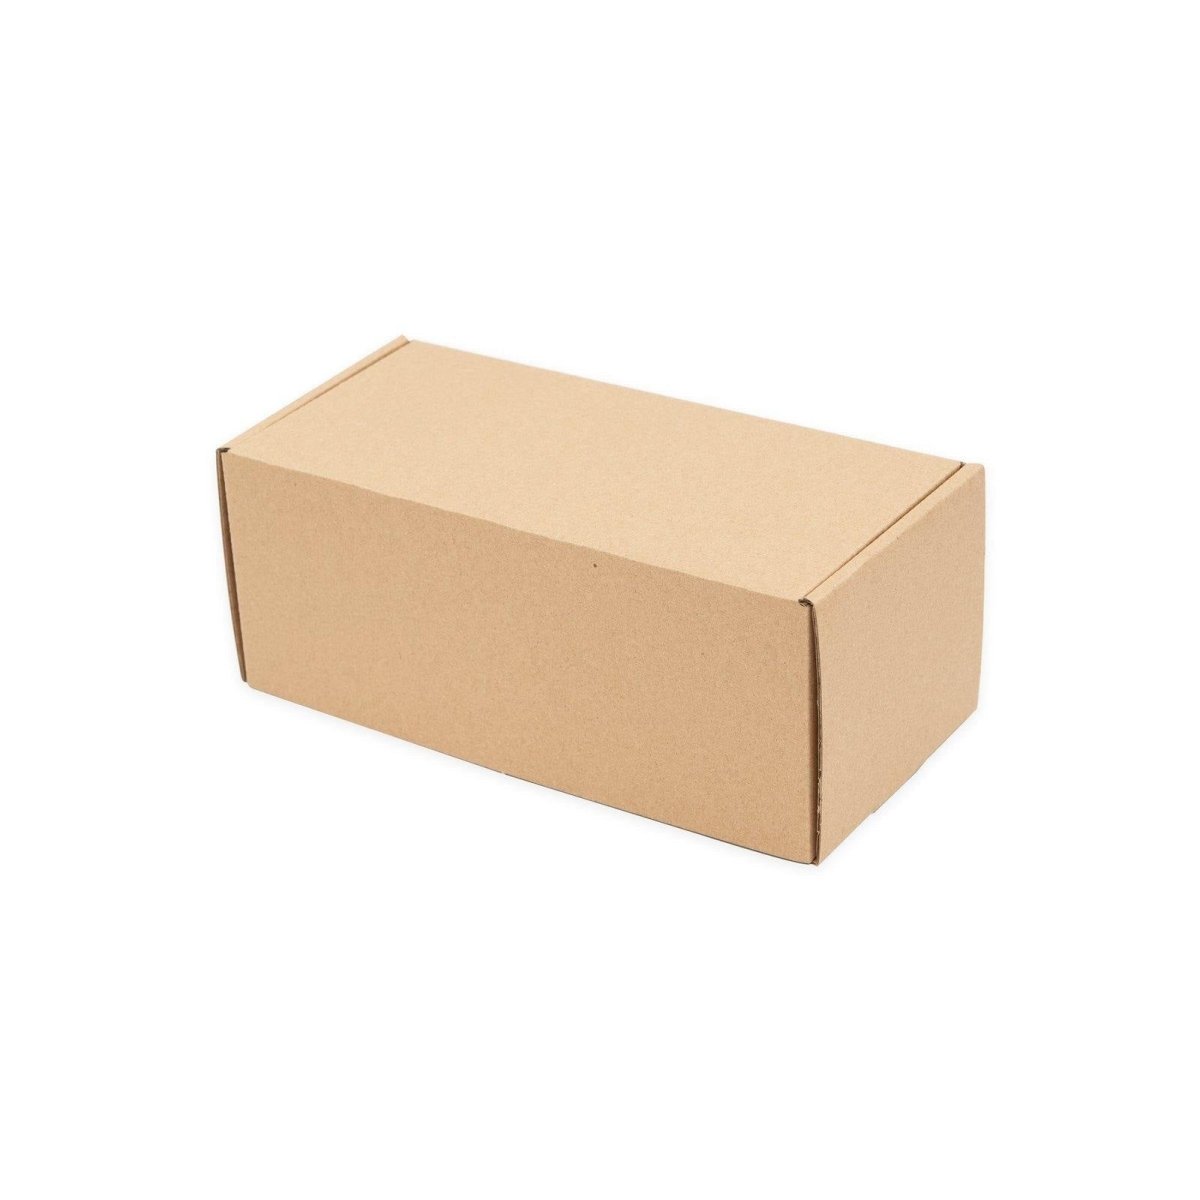 BoxMore Tuck Front Brown Mailing Box 240 x 110 x 95mm B121